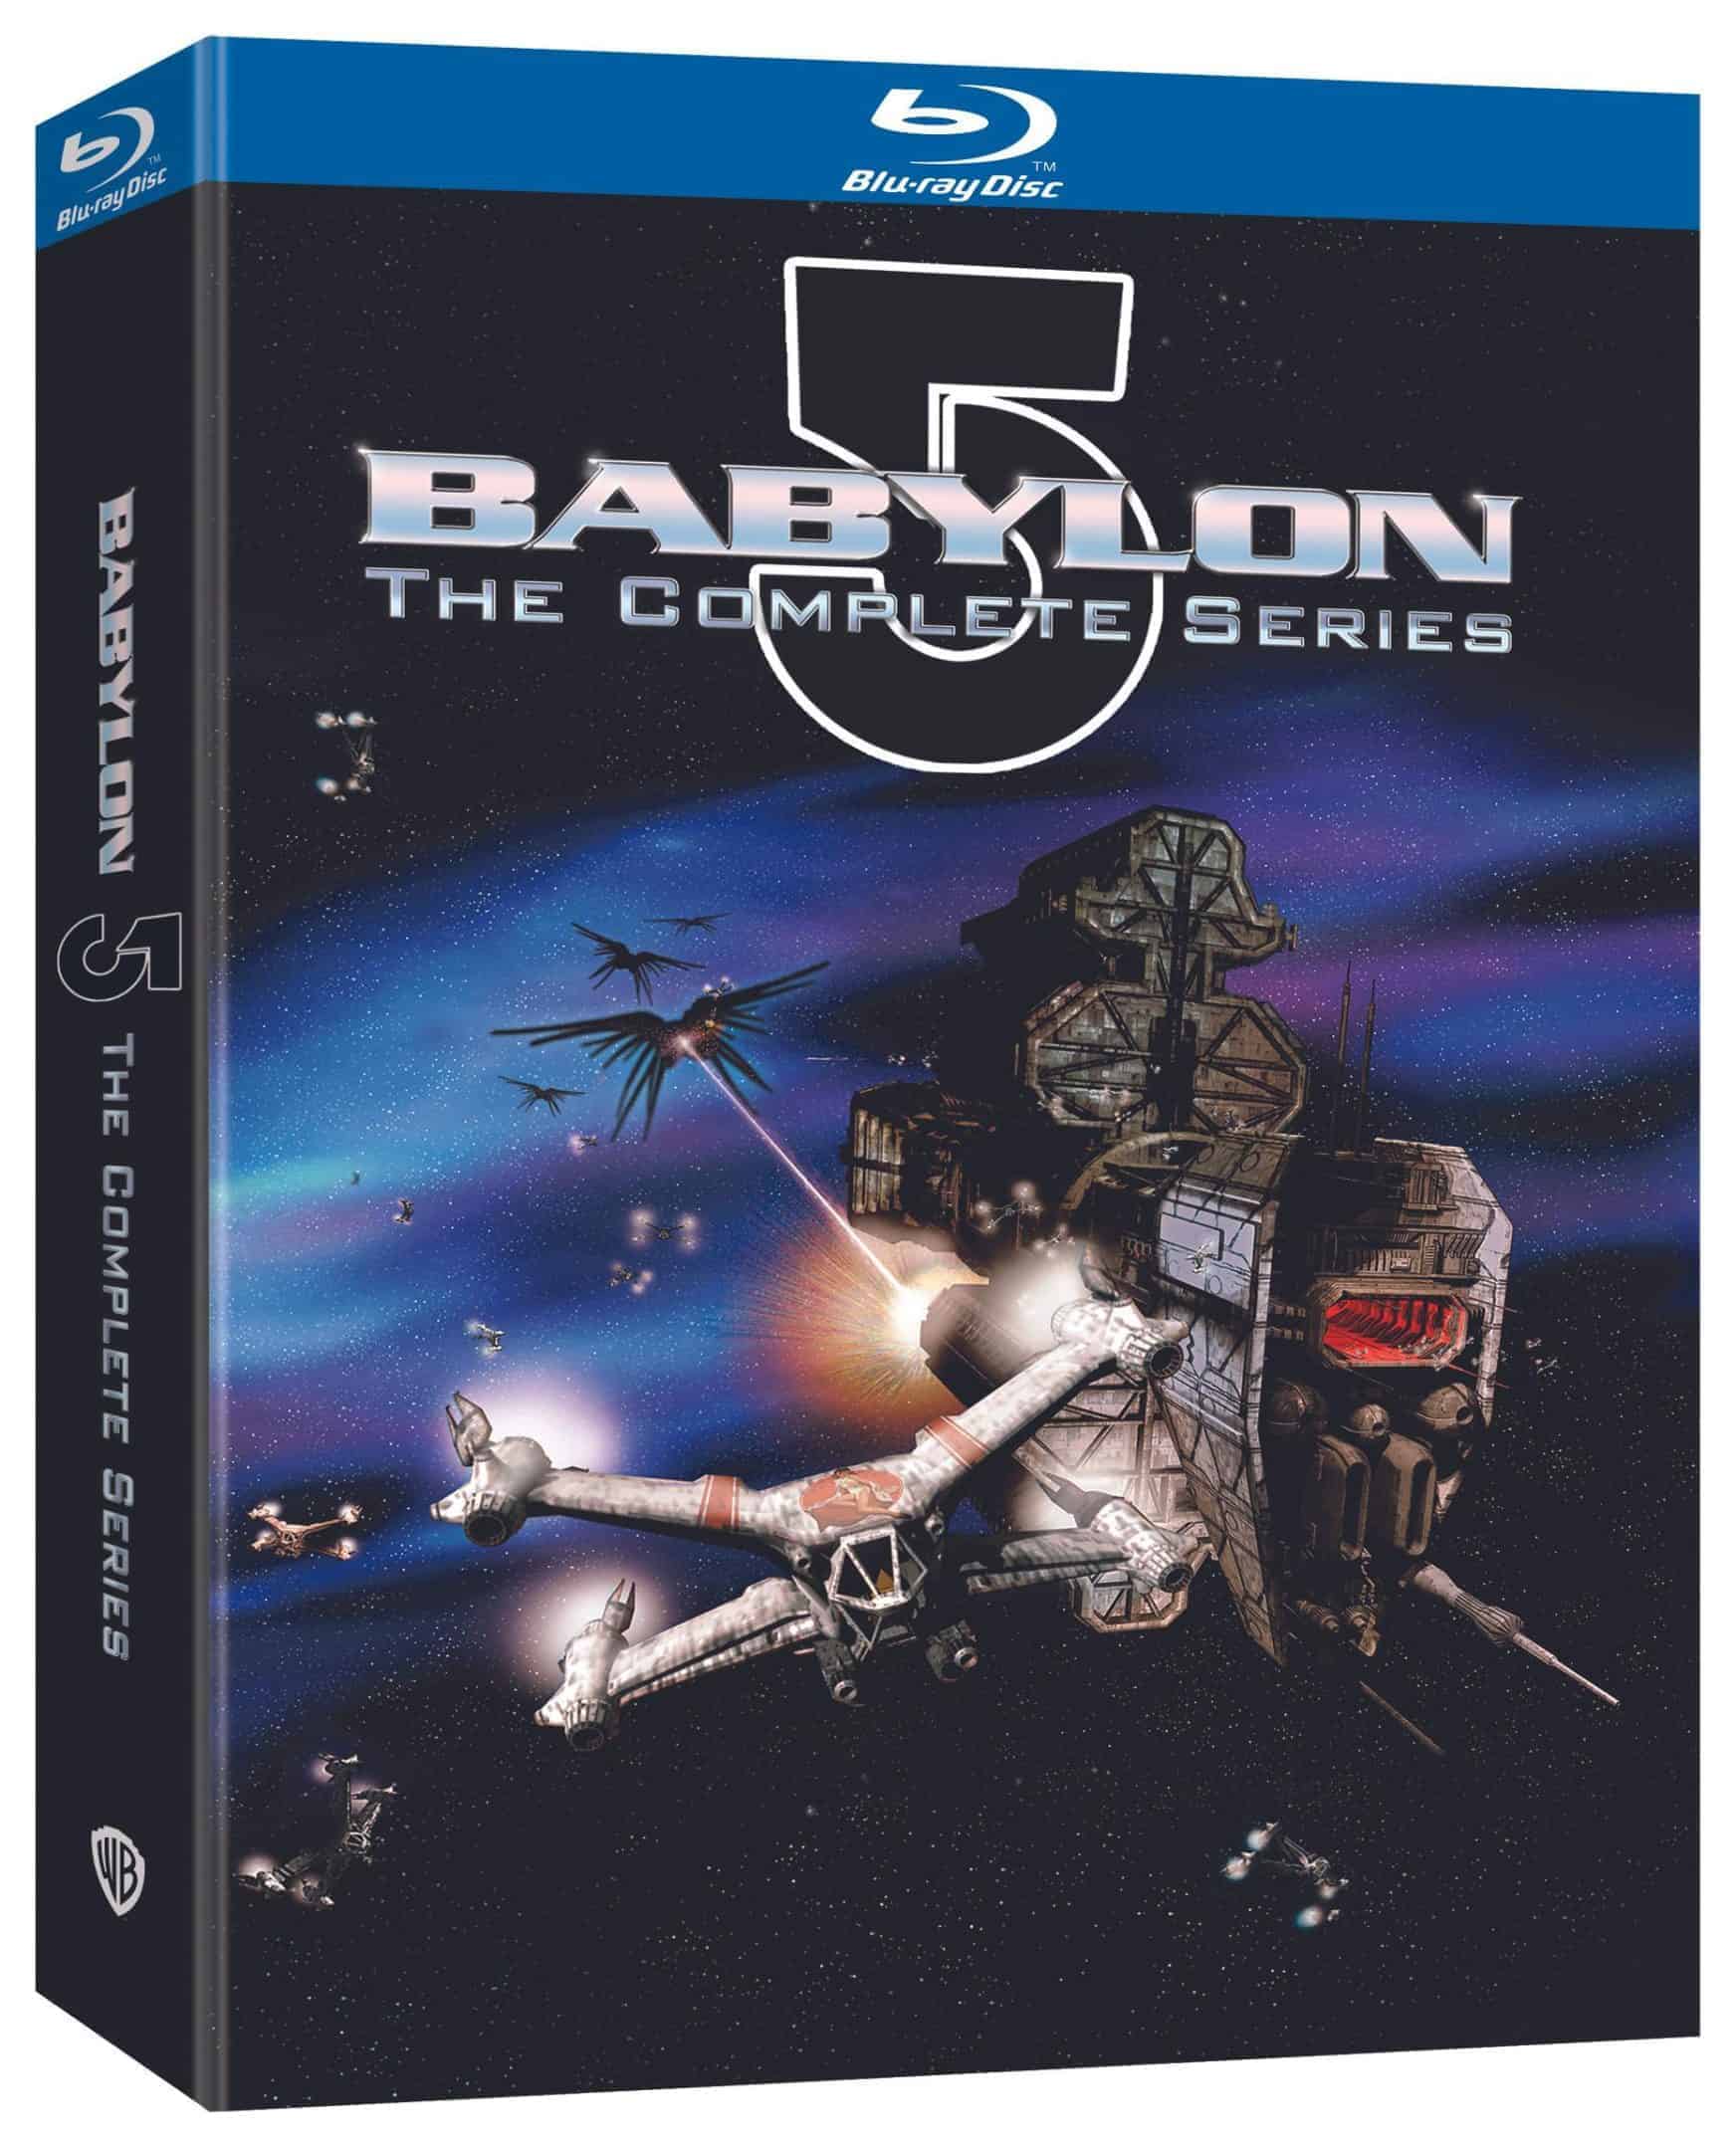 Sci-Fi Classic Babylon 5 Finally Arrives on Blu-Ray for 30th Anniversary 1